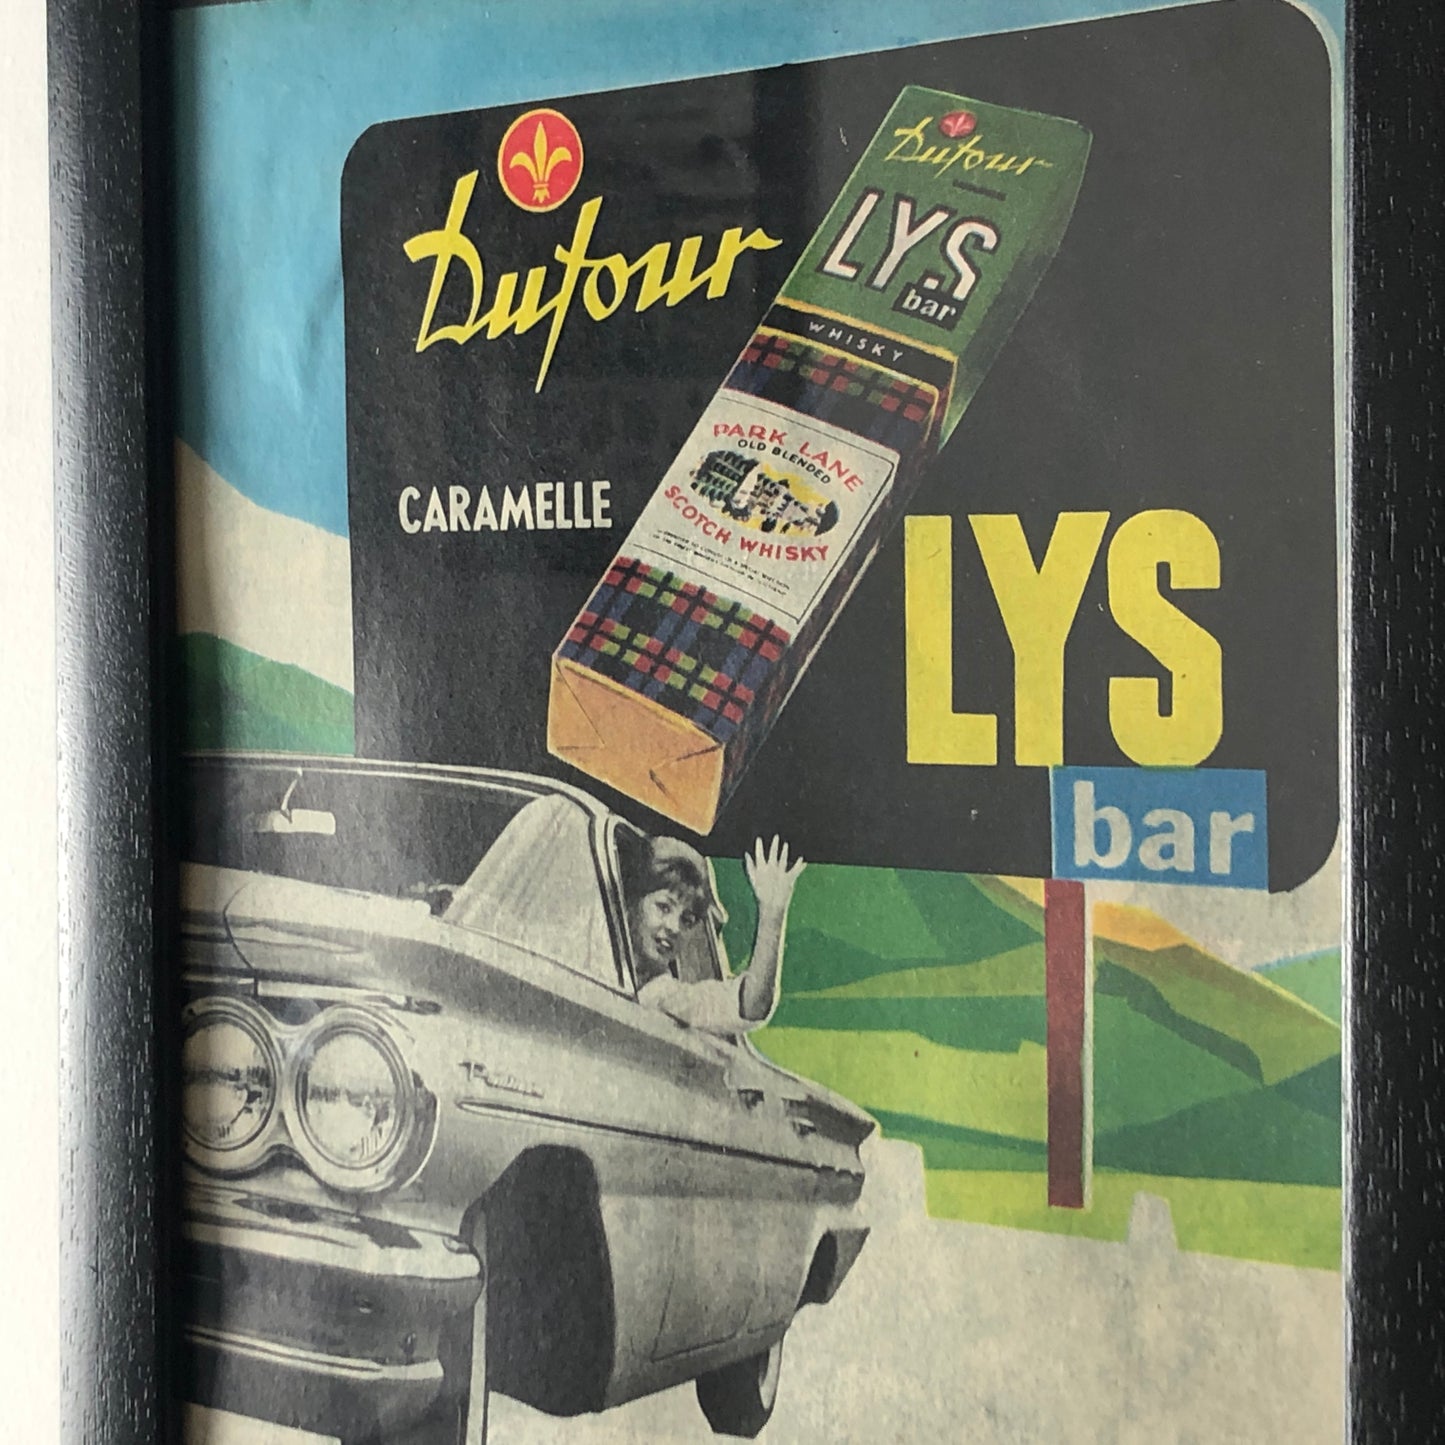 Dufour, Advertising Year 1960 Candies LYS Bar Designed by Studio Dalla Costa